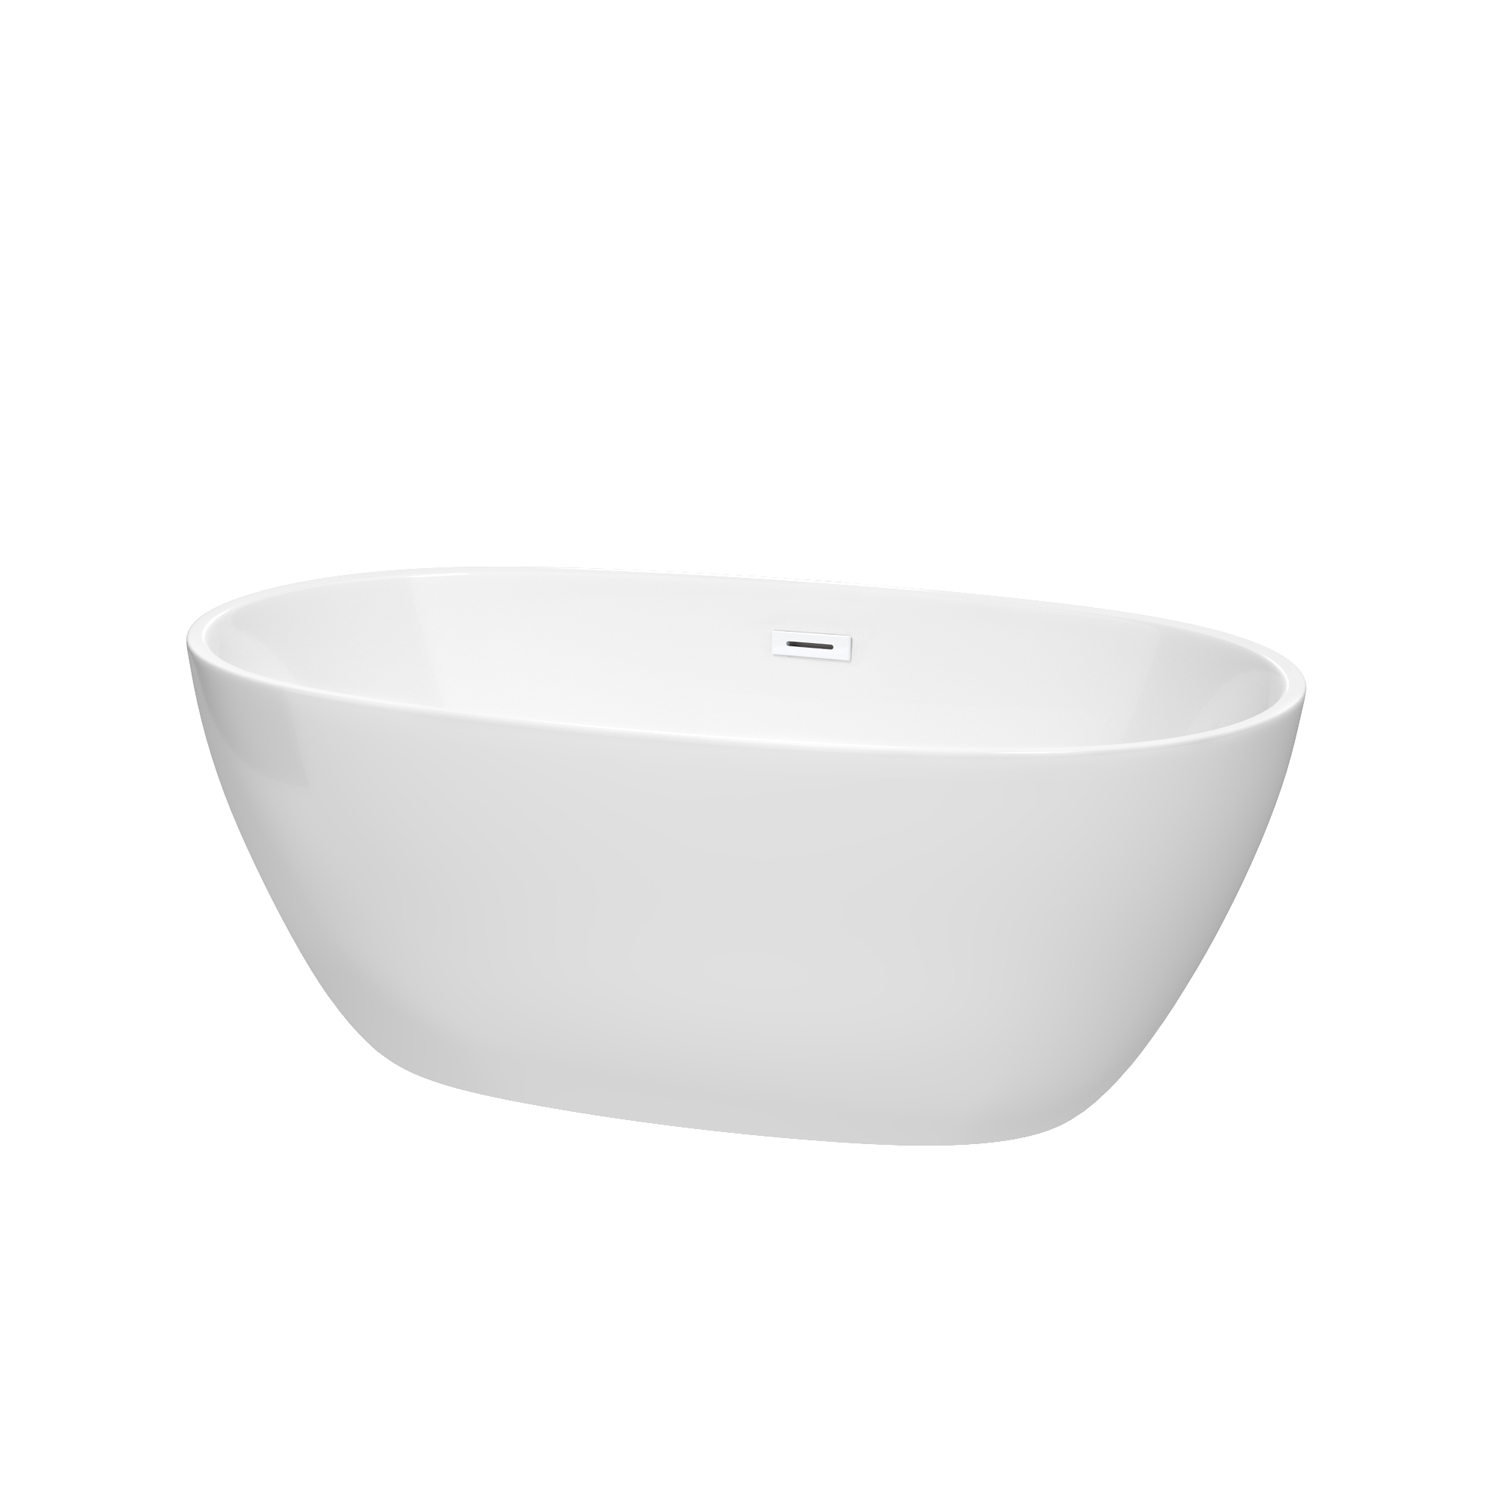 59" Freestanding Bathtub in White Finish with Overflow Trim and Shiny White Pop-up Drain